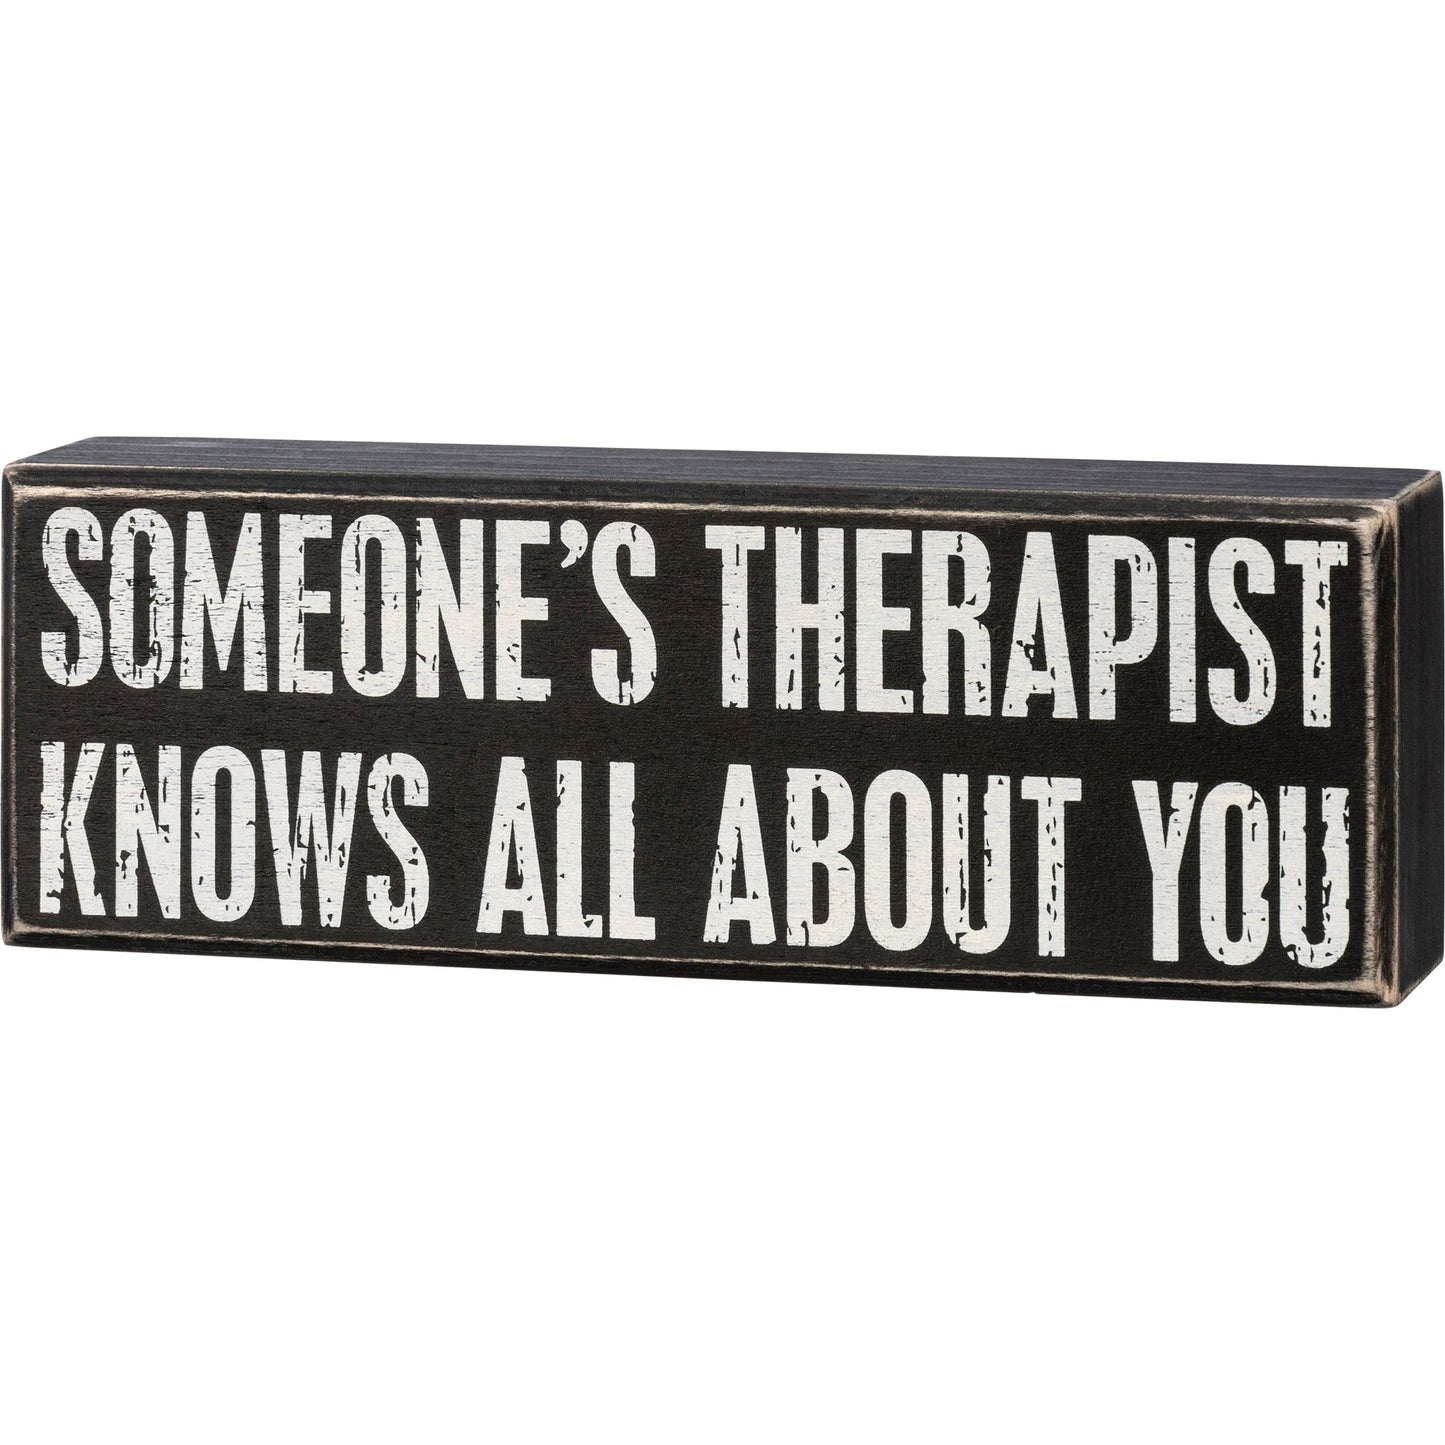 Someone's Therapist Knows All About You Box Sign | Wood | Black with White Lettering